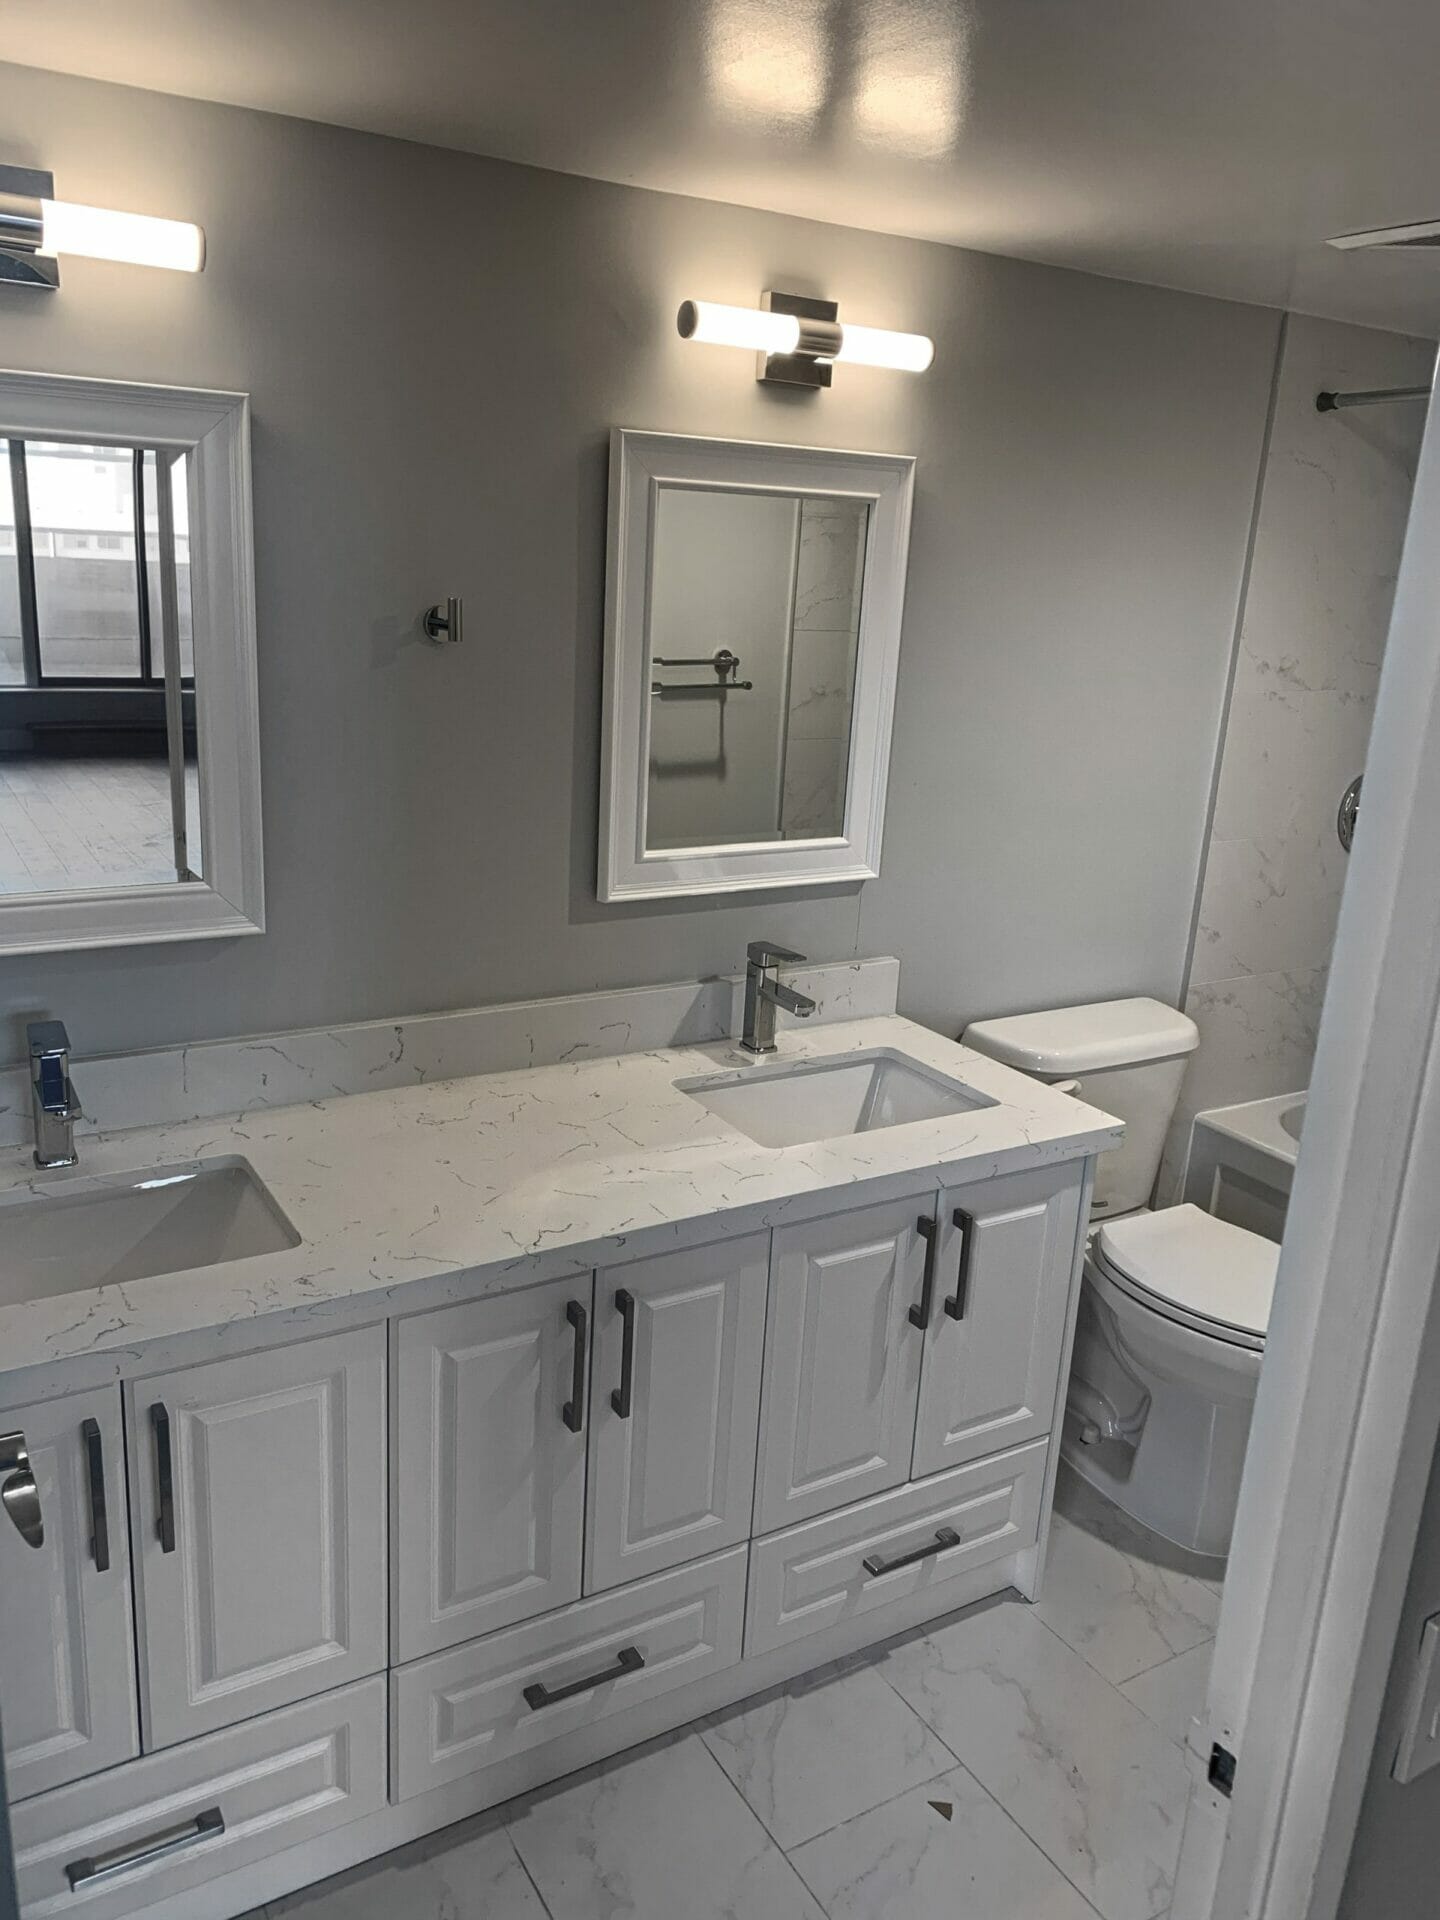 Desa Contracting, Restoration, and Janitorial Services'in Toronto gorgeously renovated bathroom at 750 Bay Street Condo features two mirrors, LED lighting, and a spotless sink cabinet.